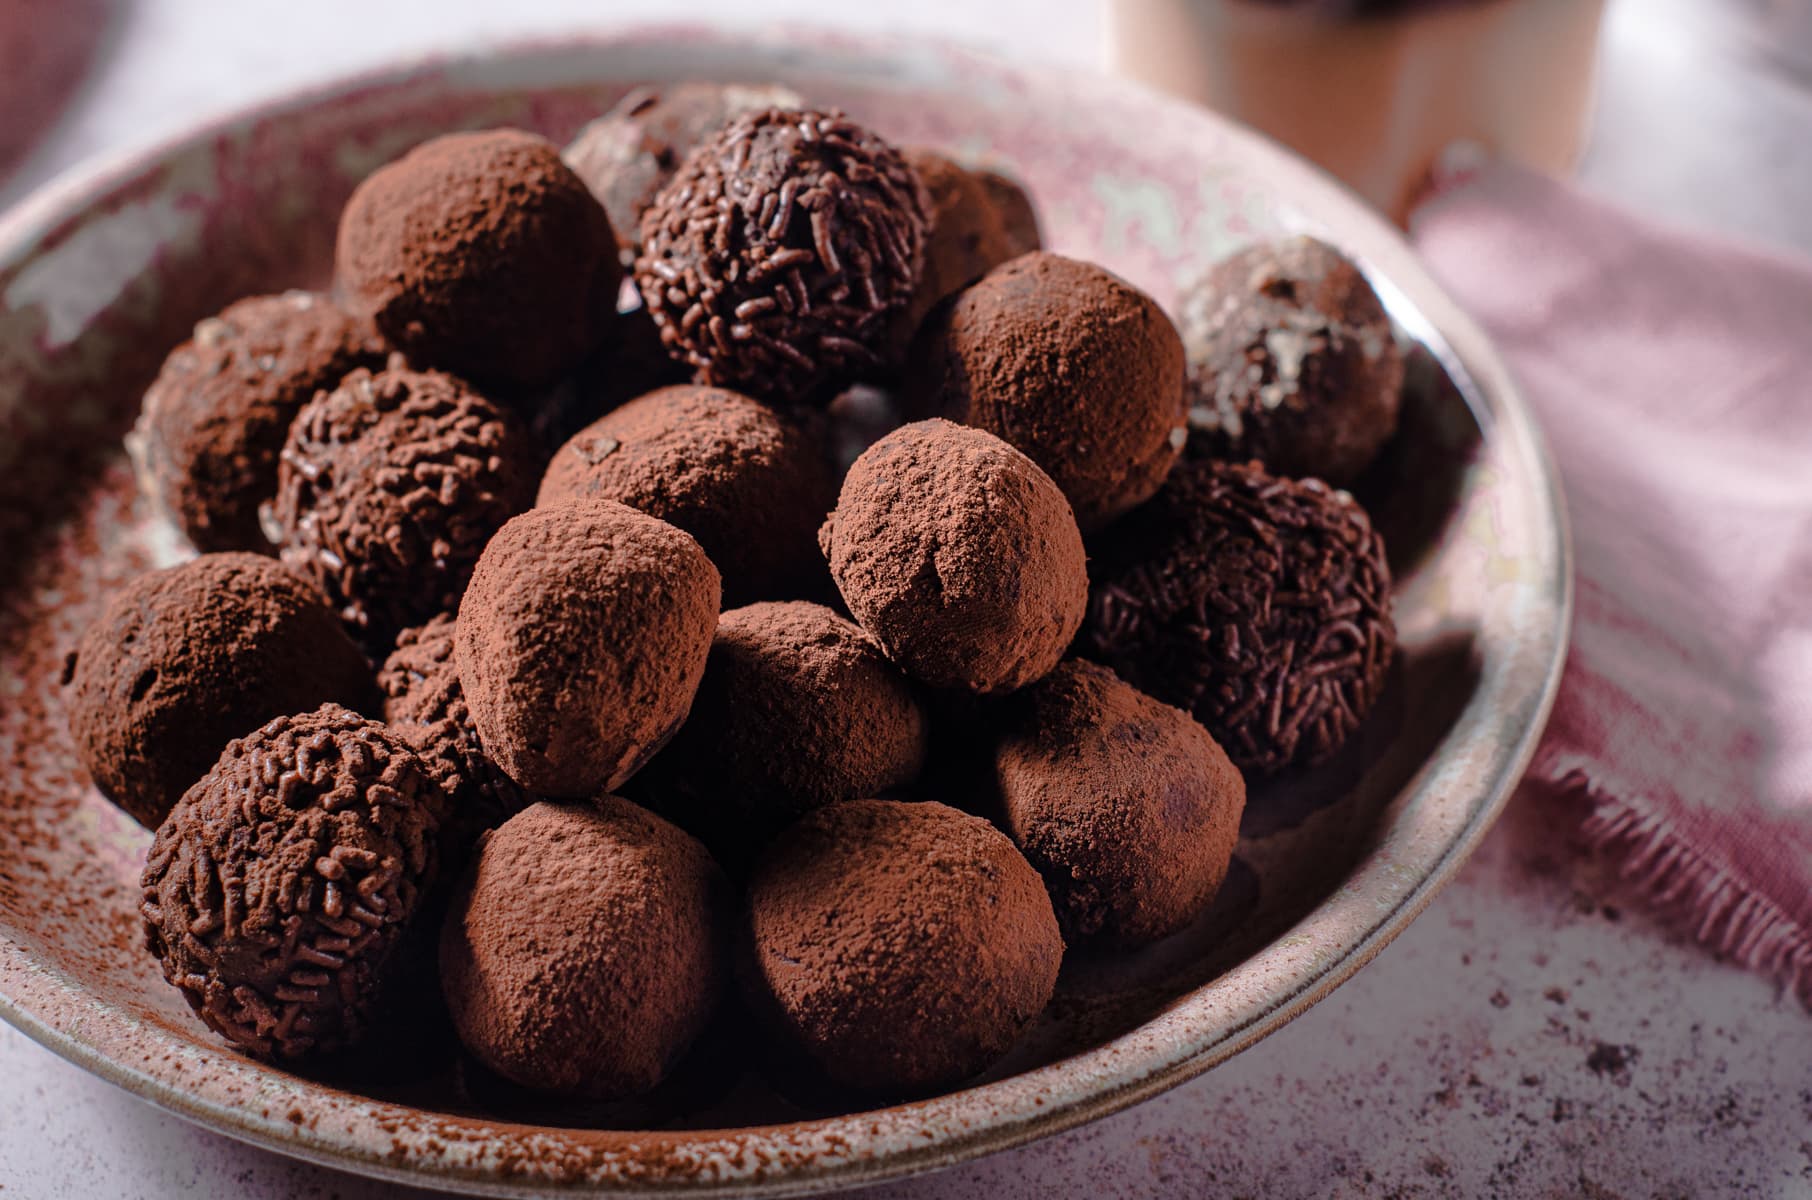 A decadent plate of handmade chocolate truffles dusted in cocoa powder and chocolate sprinkles on a pink mottled plate with a pink linen to the back right.